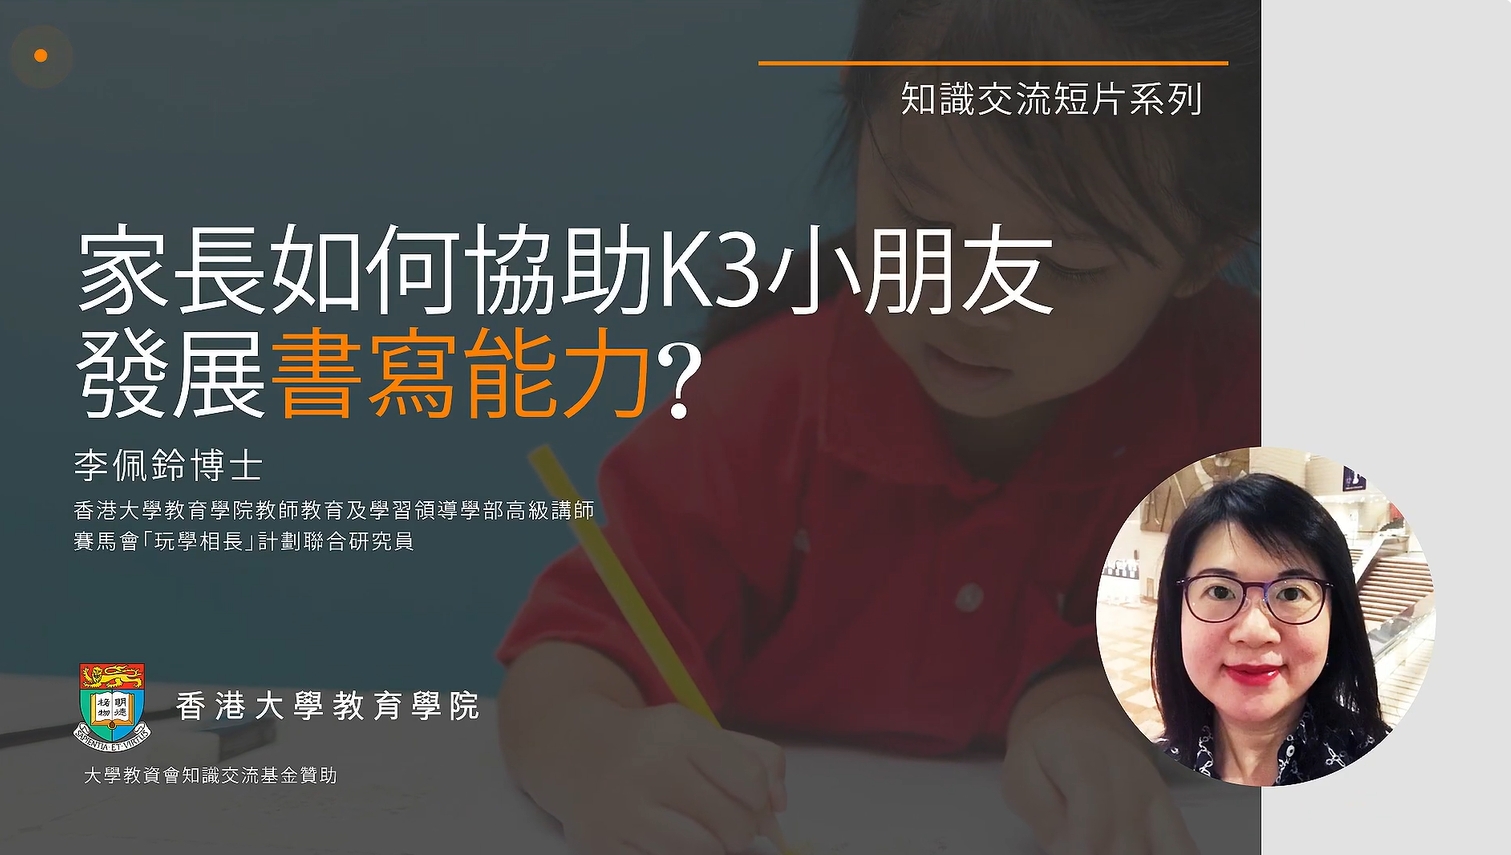 – Education Seminar: How can parents help K3 children develop their writing skills?